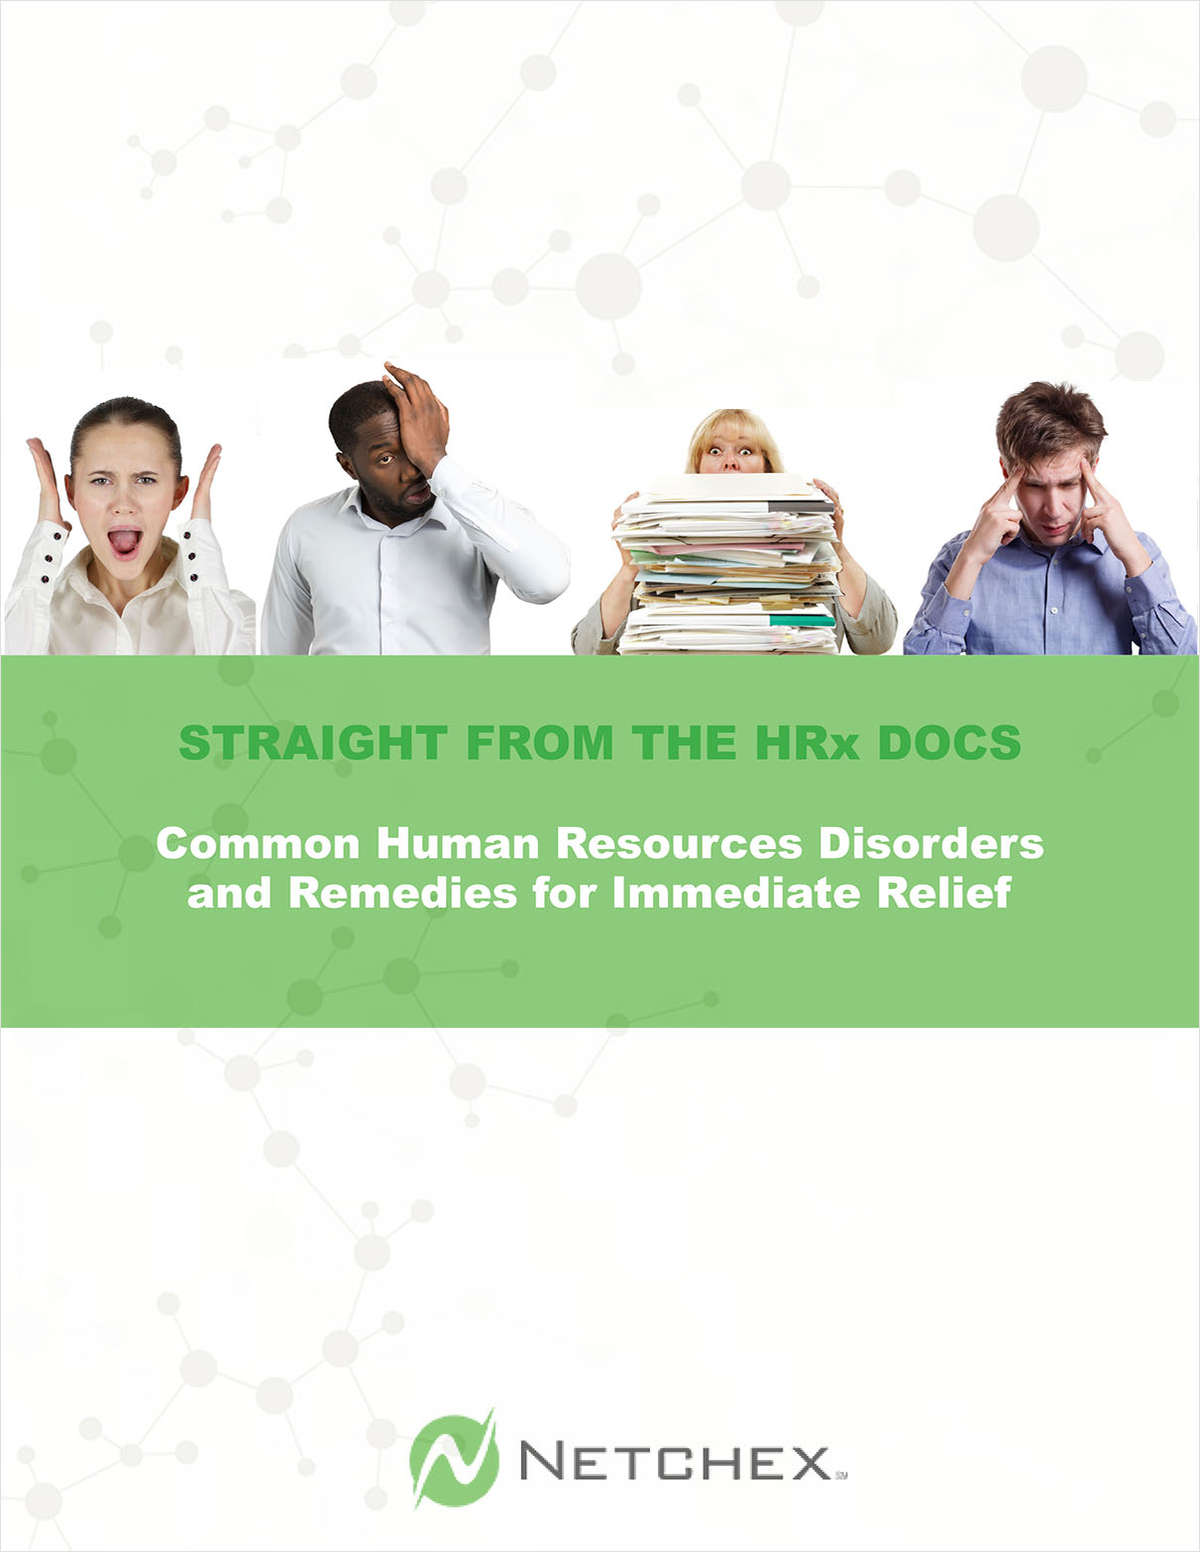 Common Human Resources Disorders and Remedies  for Immediate Relief